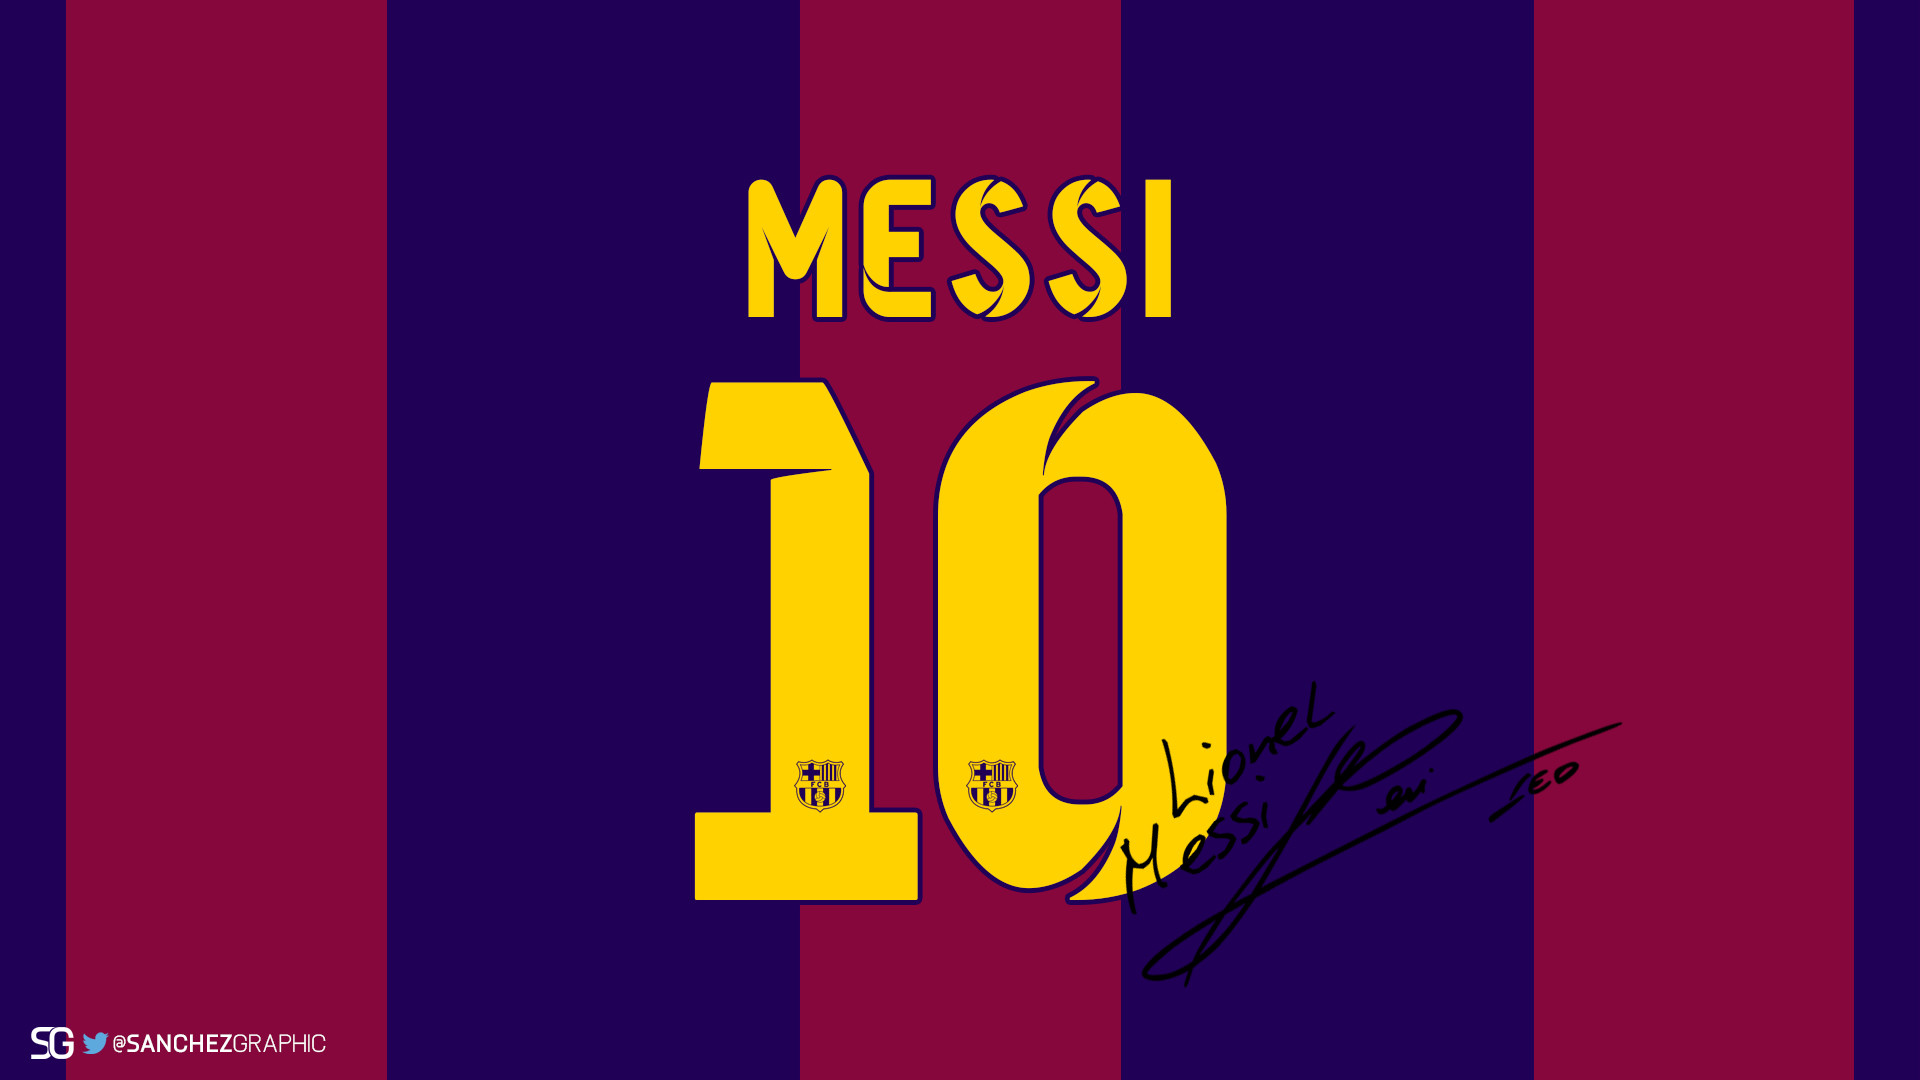 1920x1080 Messi HD Wallpapers Free Download http://wallpaperxyz.com/lionel-andres-leo- messi-m10-wallpapers-full-hd-free-download/